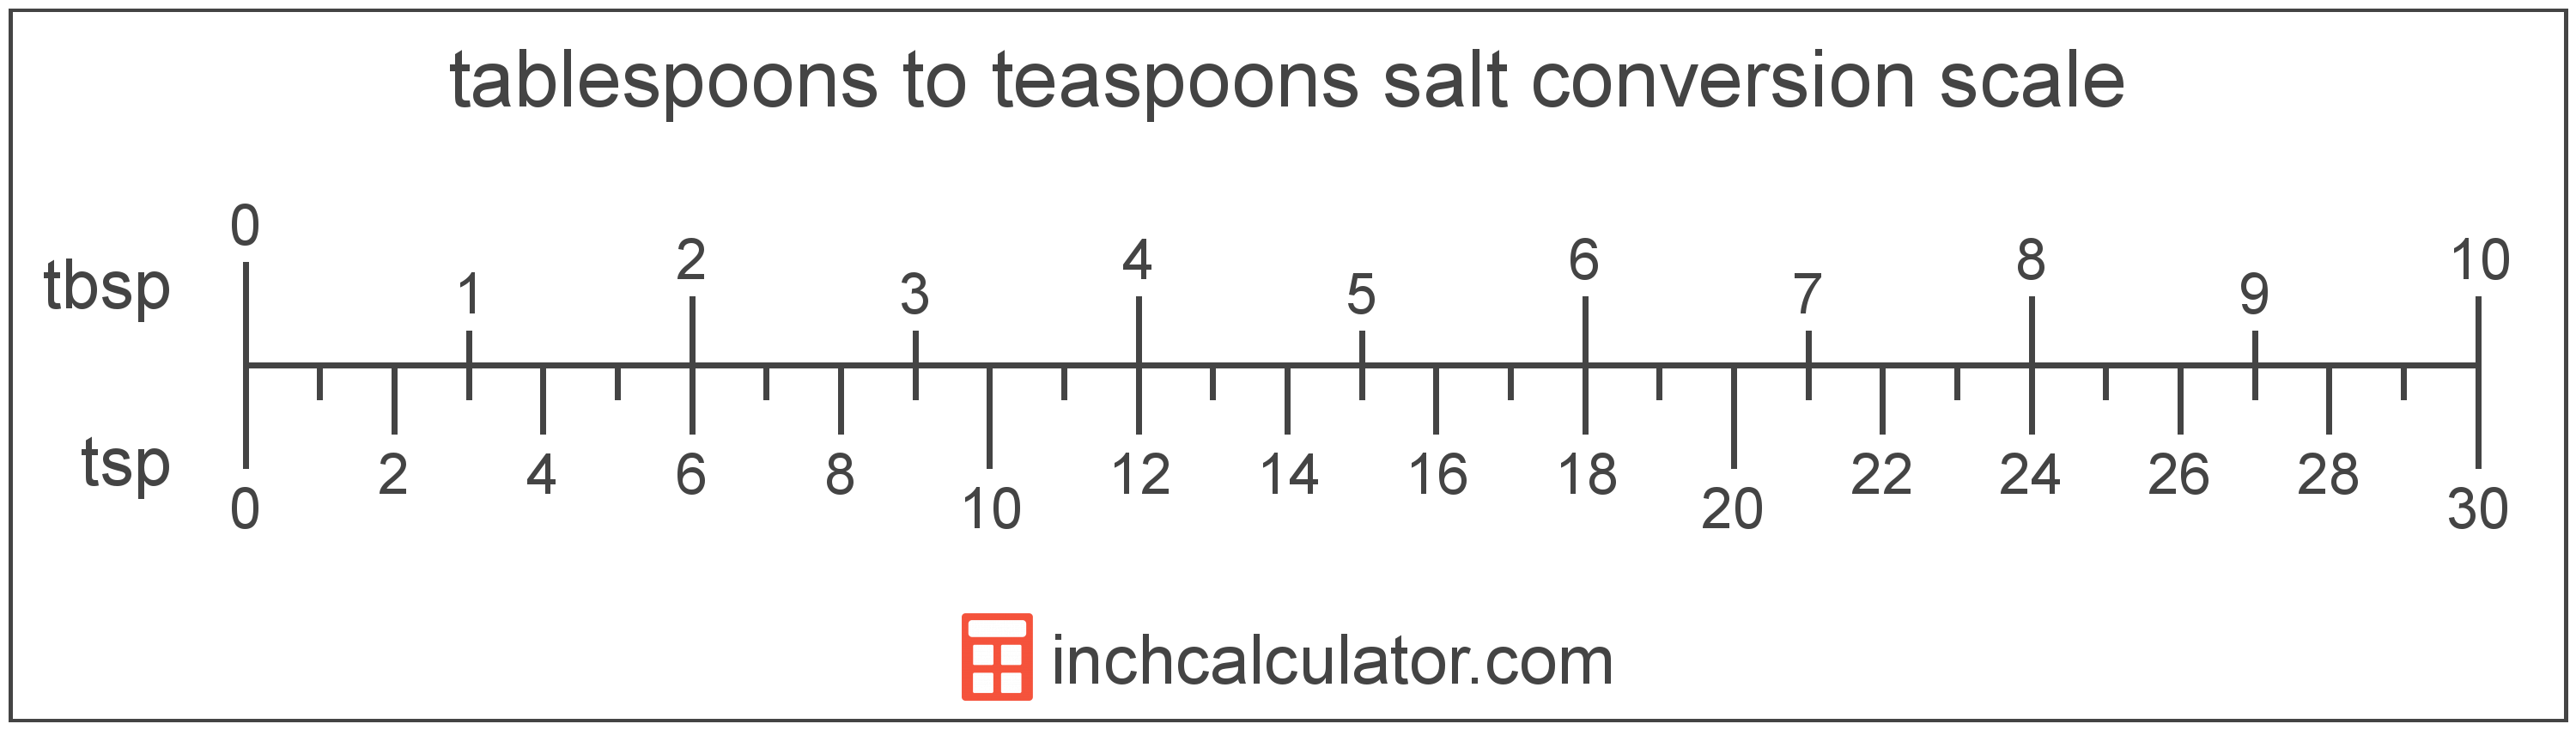 conversion scale showing tablespoons and equivalent teaspoons salt volume values